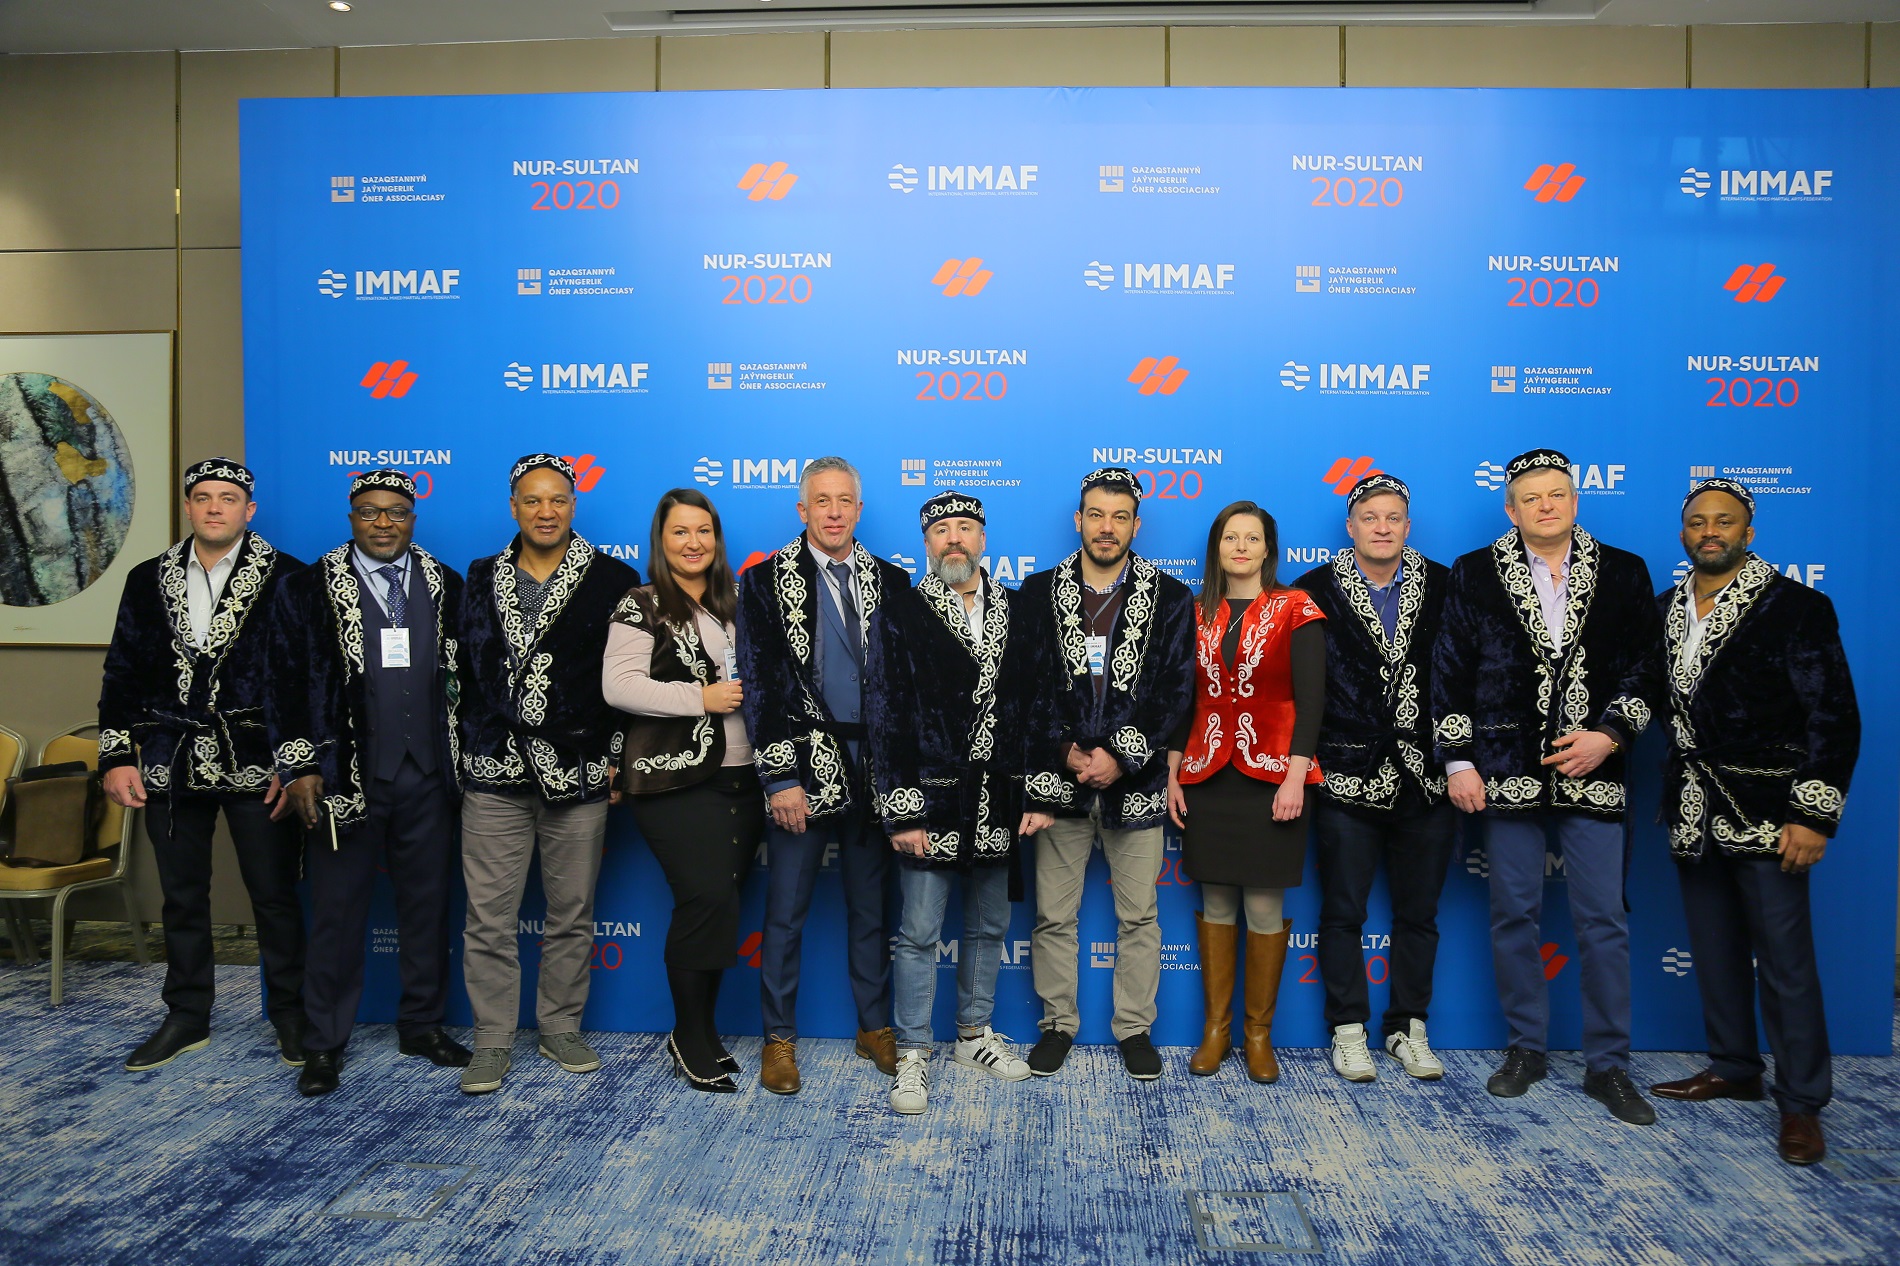 IMMAF Board Approves 2020 Action Plans & Welcomes Uzbekistan as New Member